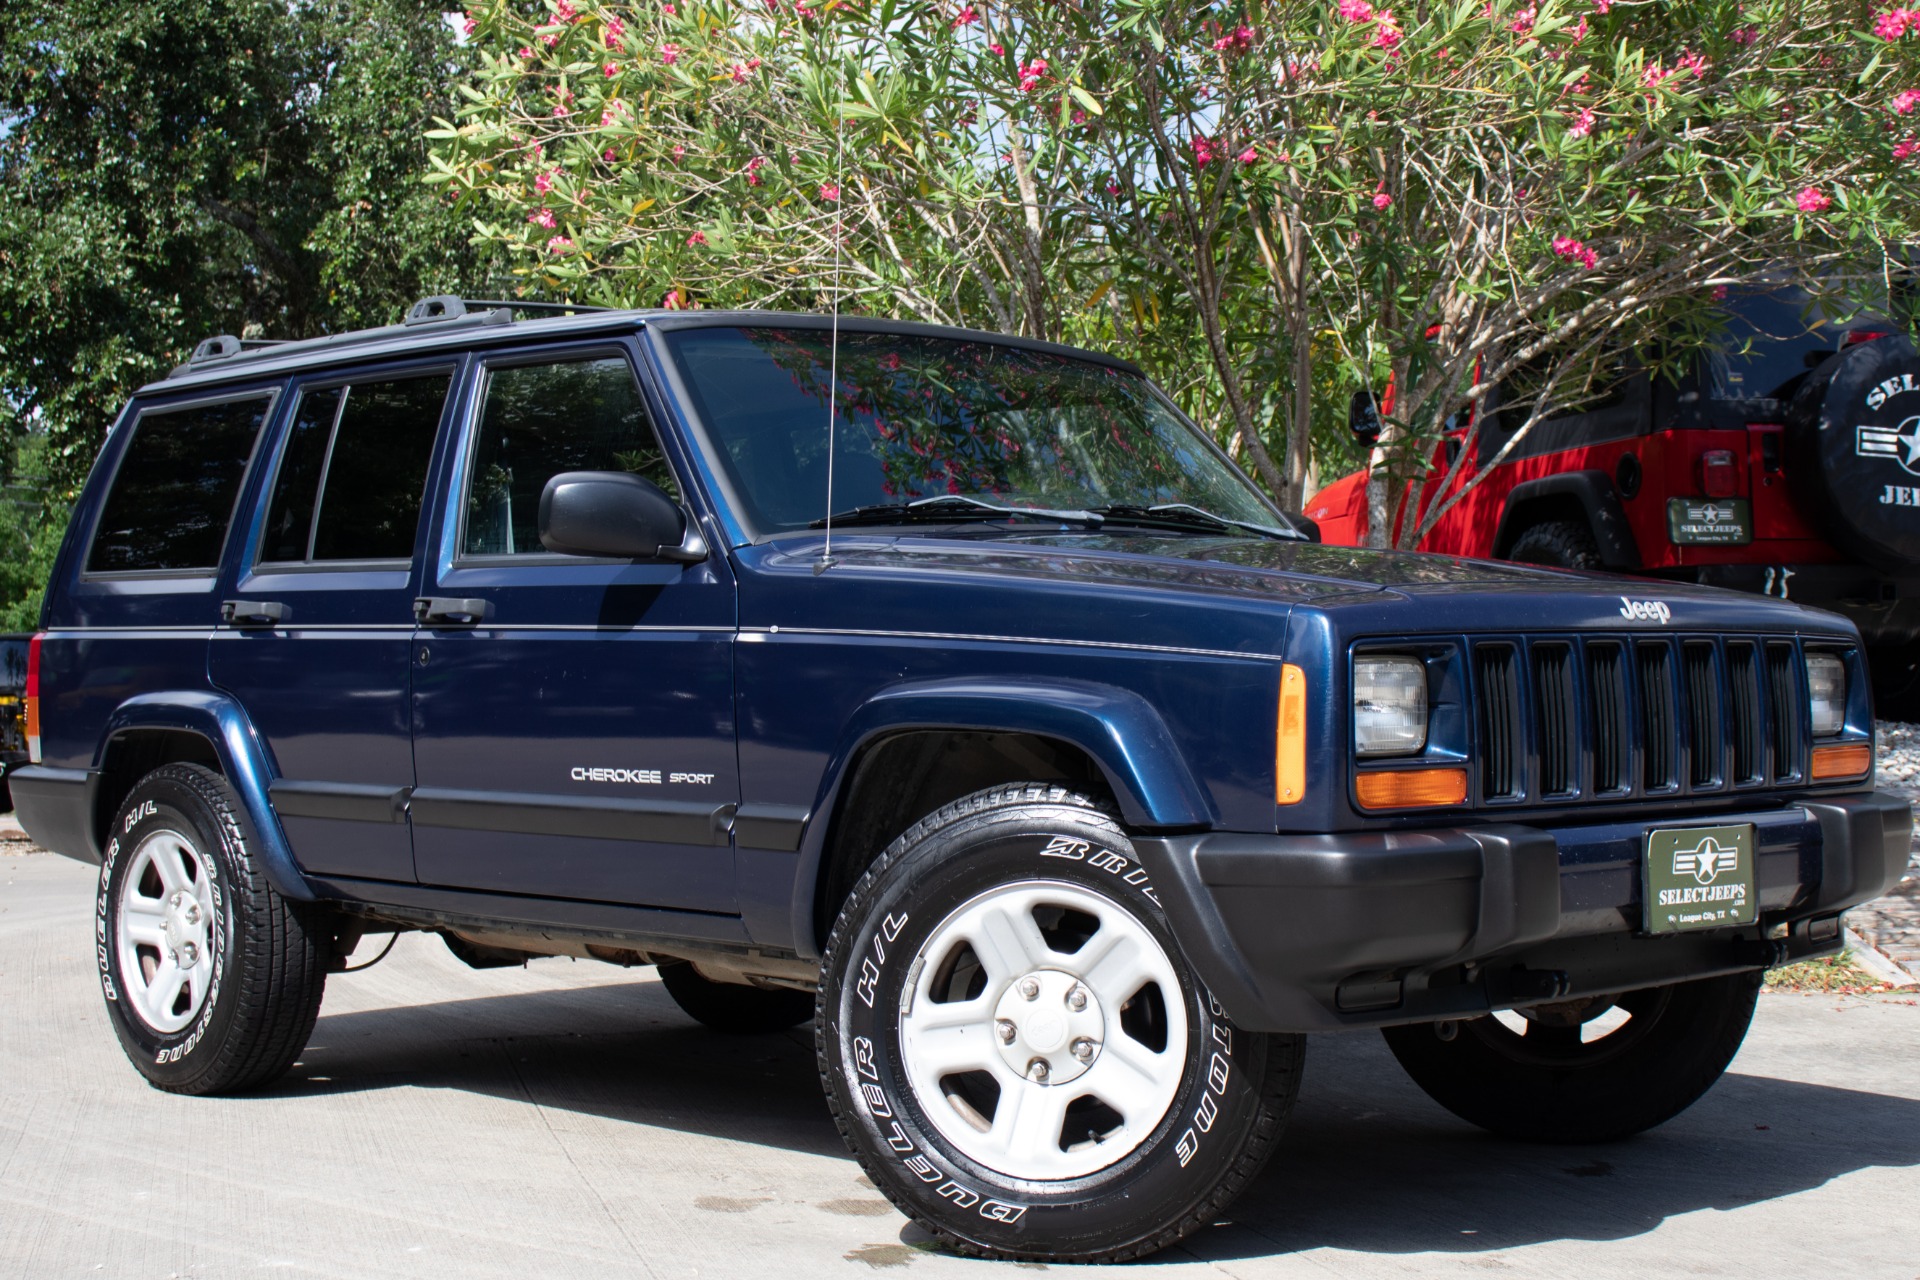 Used 2001 Jeep Cherokee Sport For Sale 6995 Select Jeeps Inc